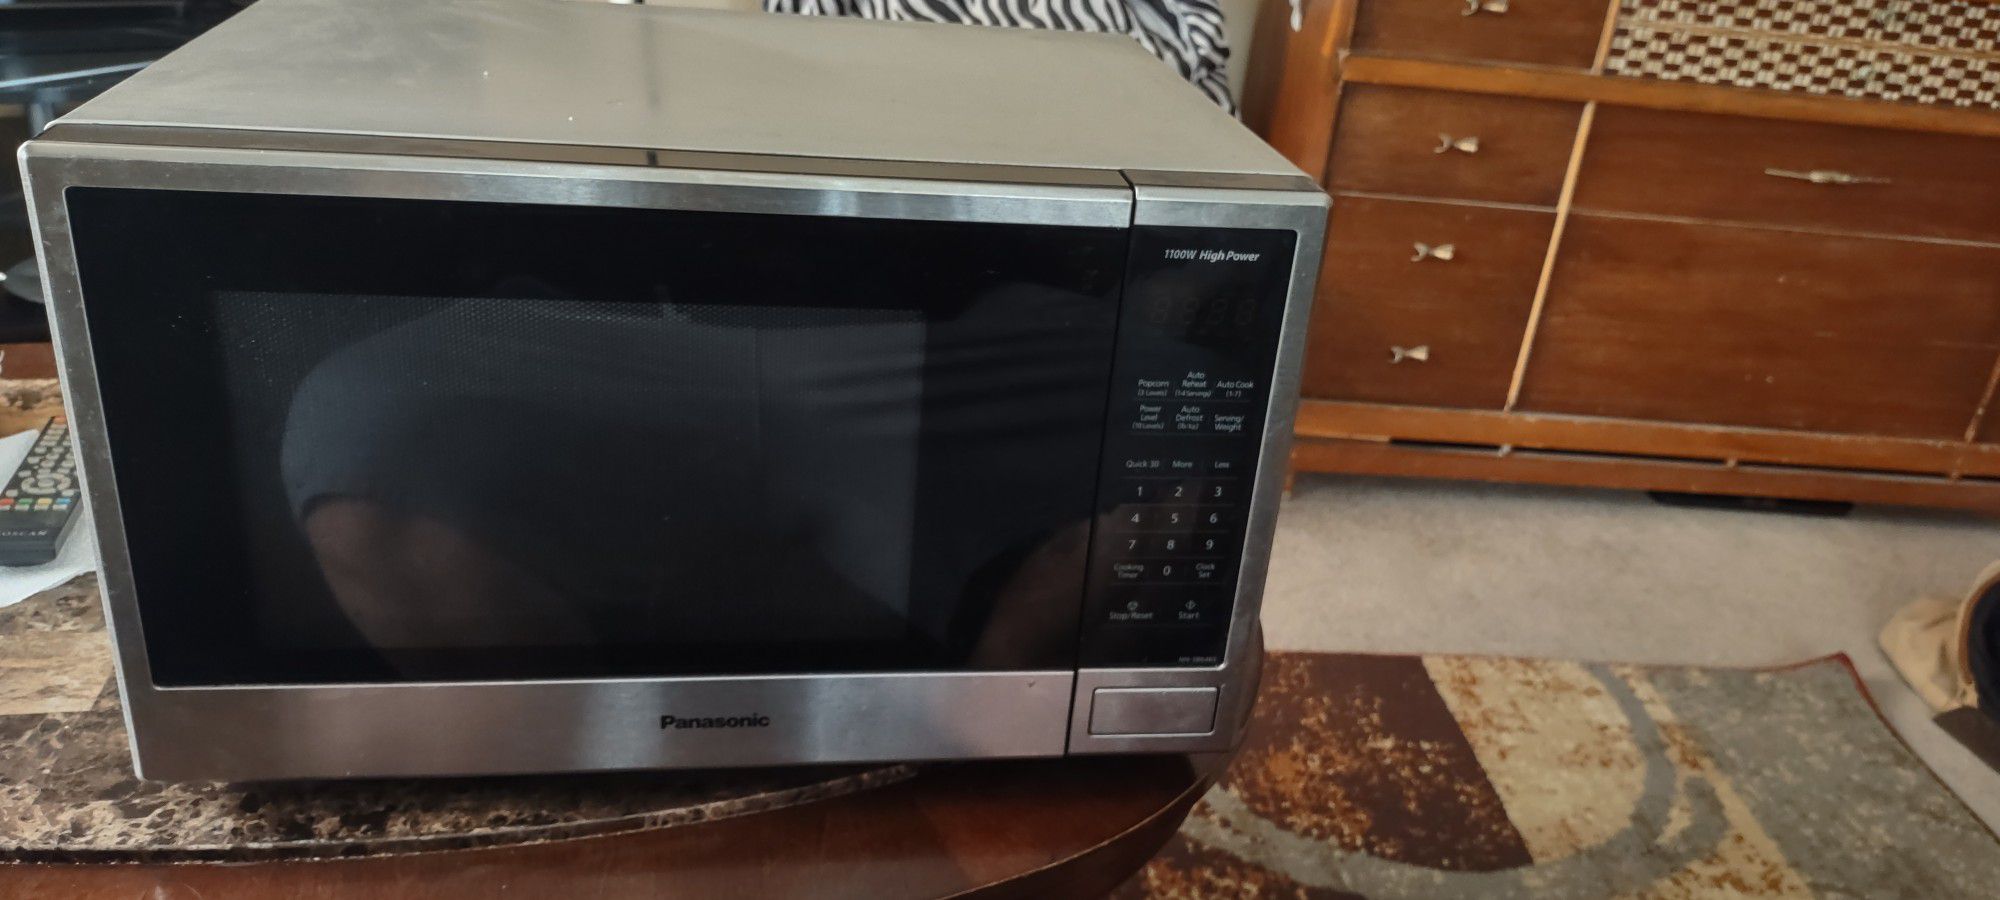 Microwave Was 200$ Brand New 